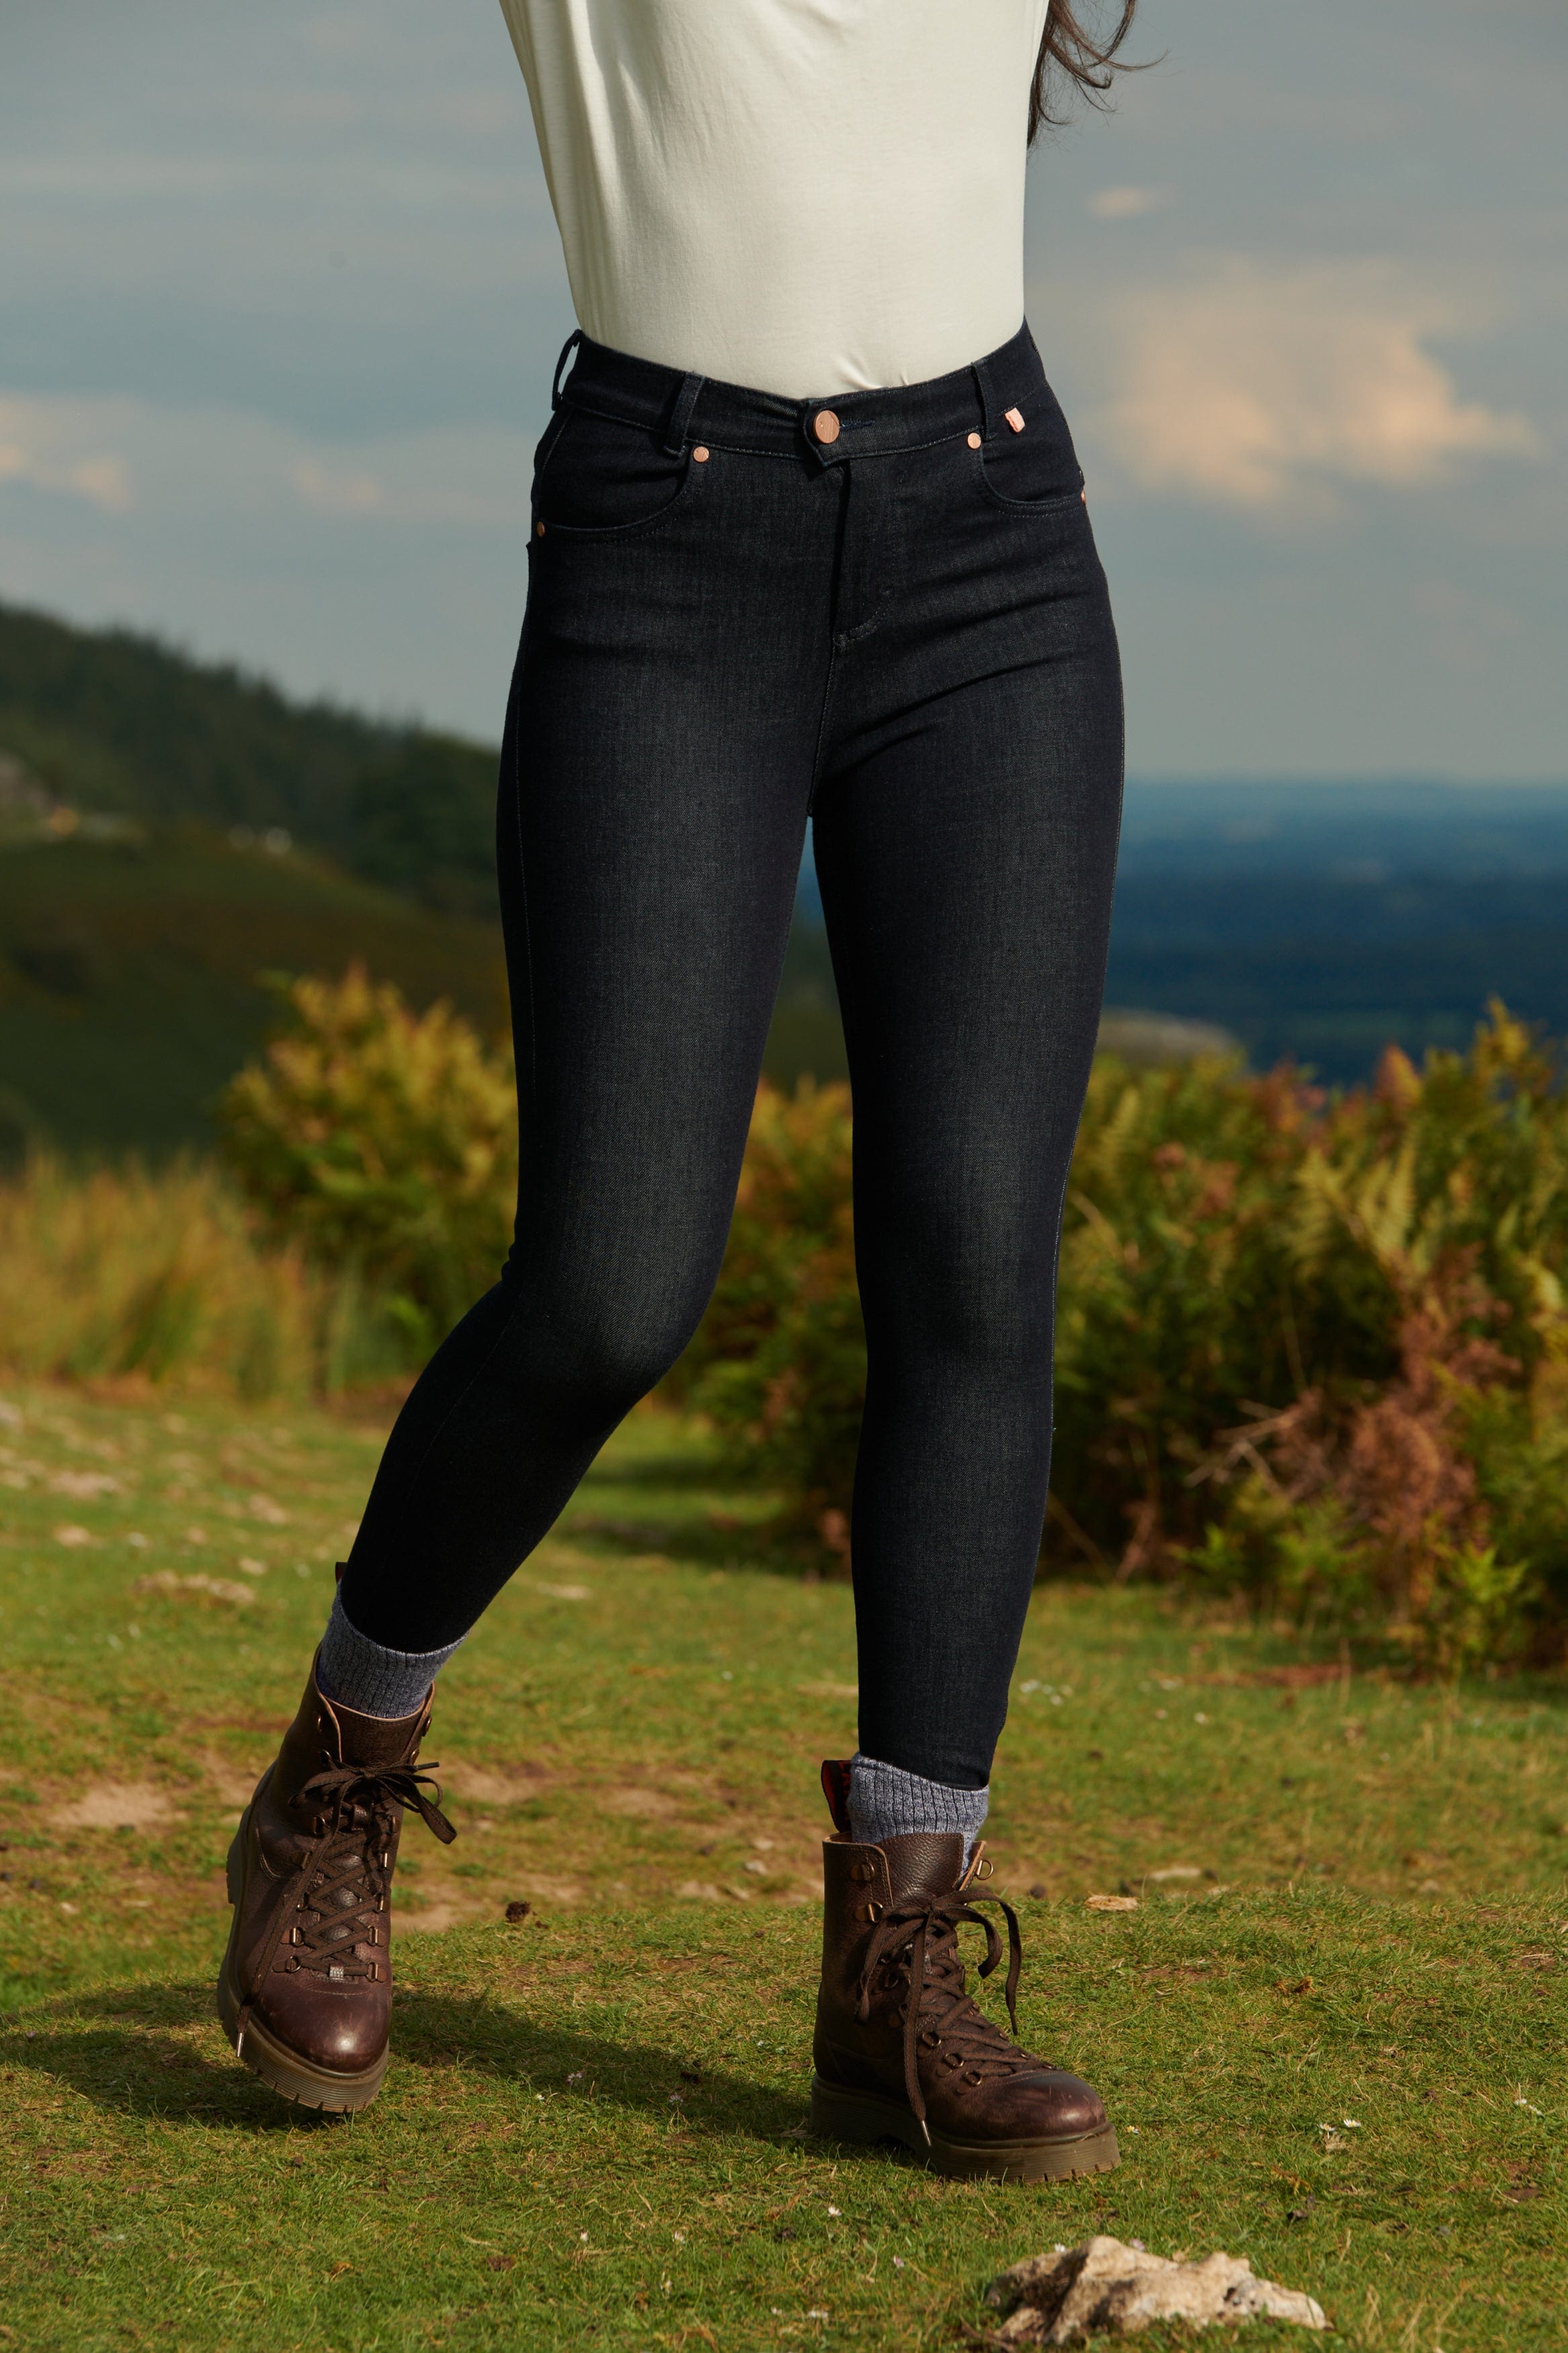 ACAI Outdoorwear: Home Of The Skinny Outdoor Trousers 